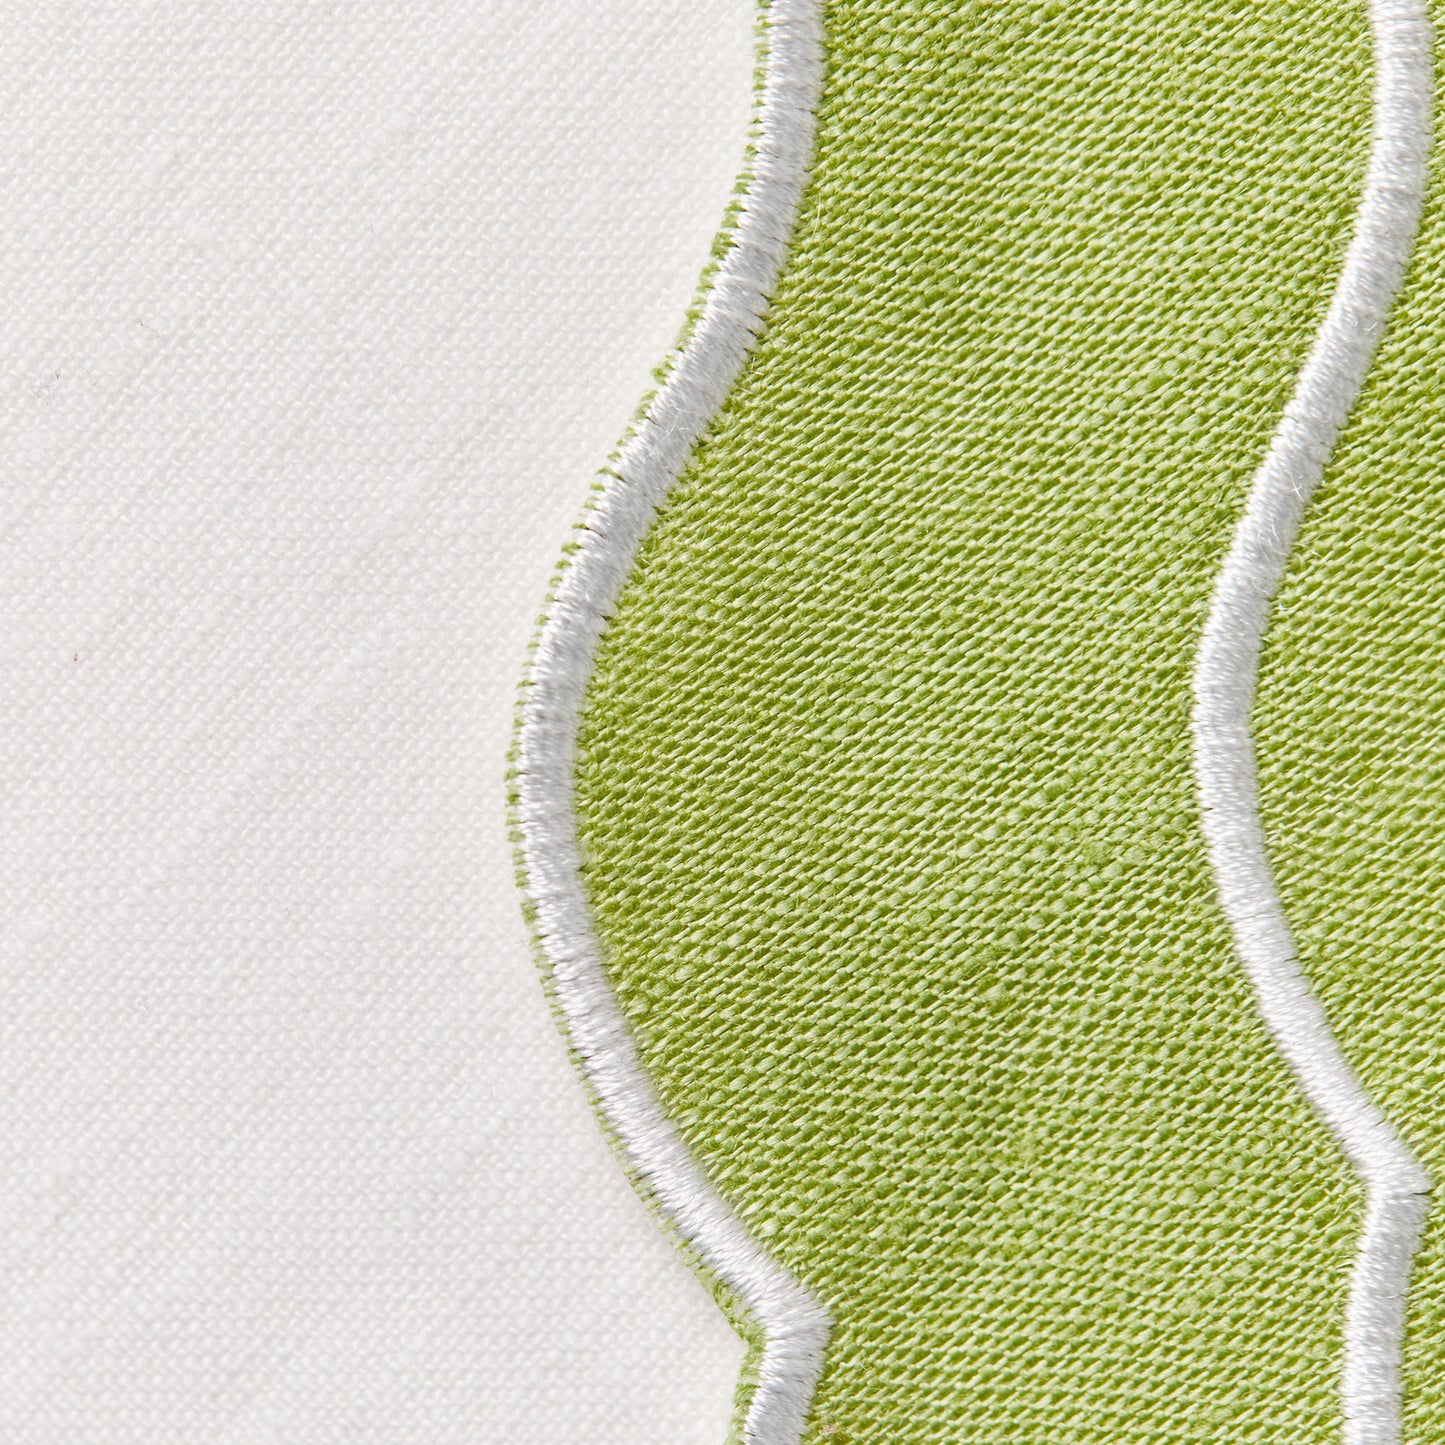 Set of 4 - Linen Scalloped Edged Placemats - Green